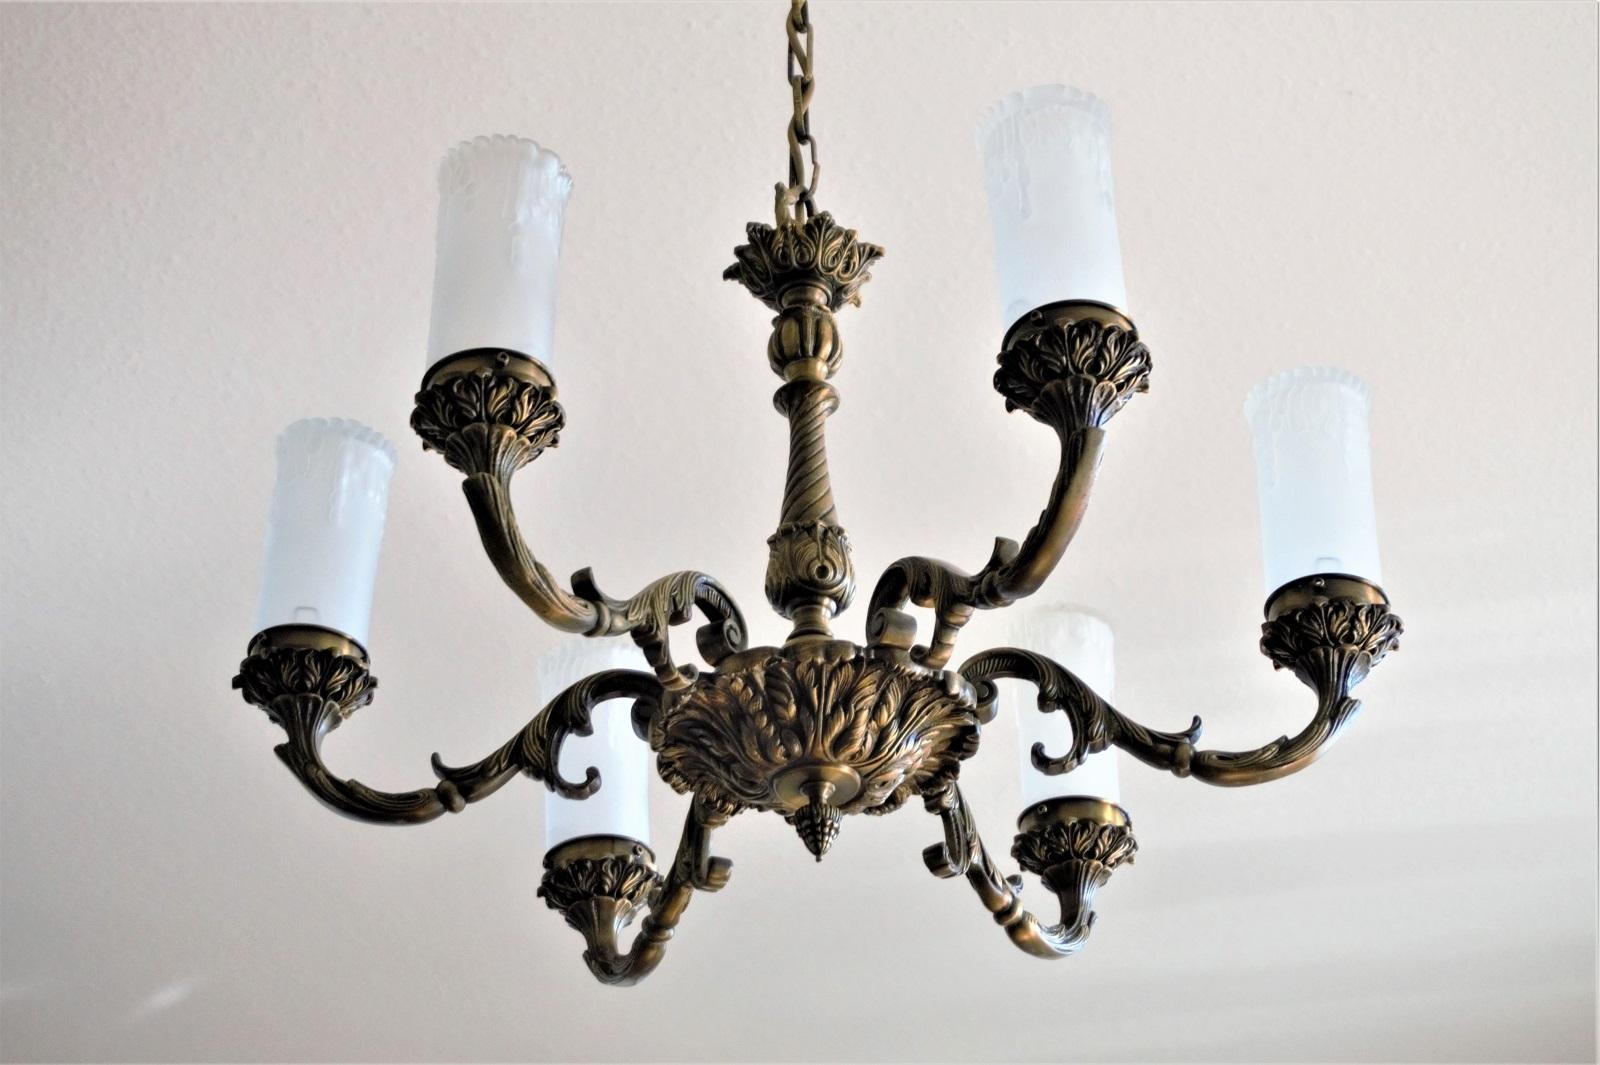 Large Art Nouveau solid patinated bronze six-light chandelier with beautiful frosted glass candle shaped shades, France, 1910-1920.
Number of lights: Six E14 bulb sockets. Rewired and ready to hang.
Measures:
Height 42 in (107 cm)
Diameter 25 in